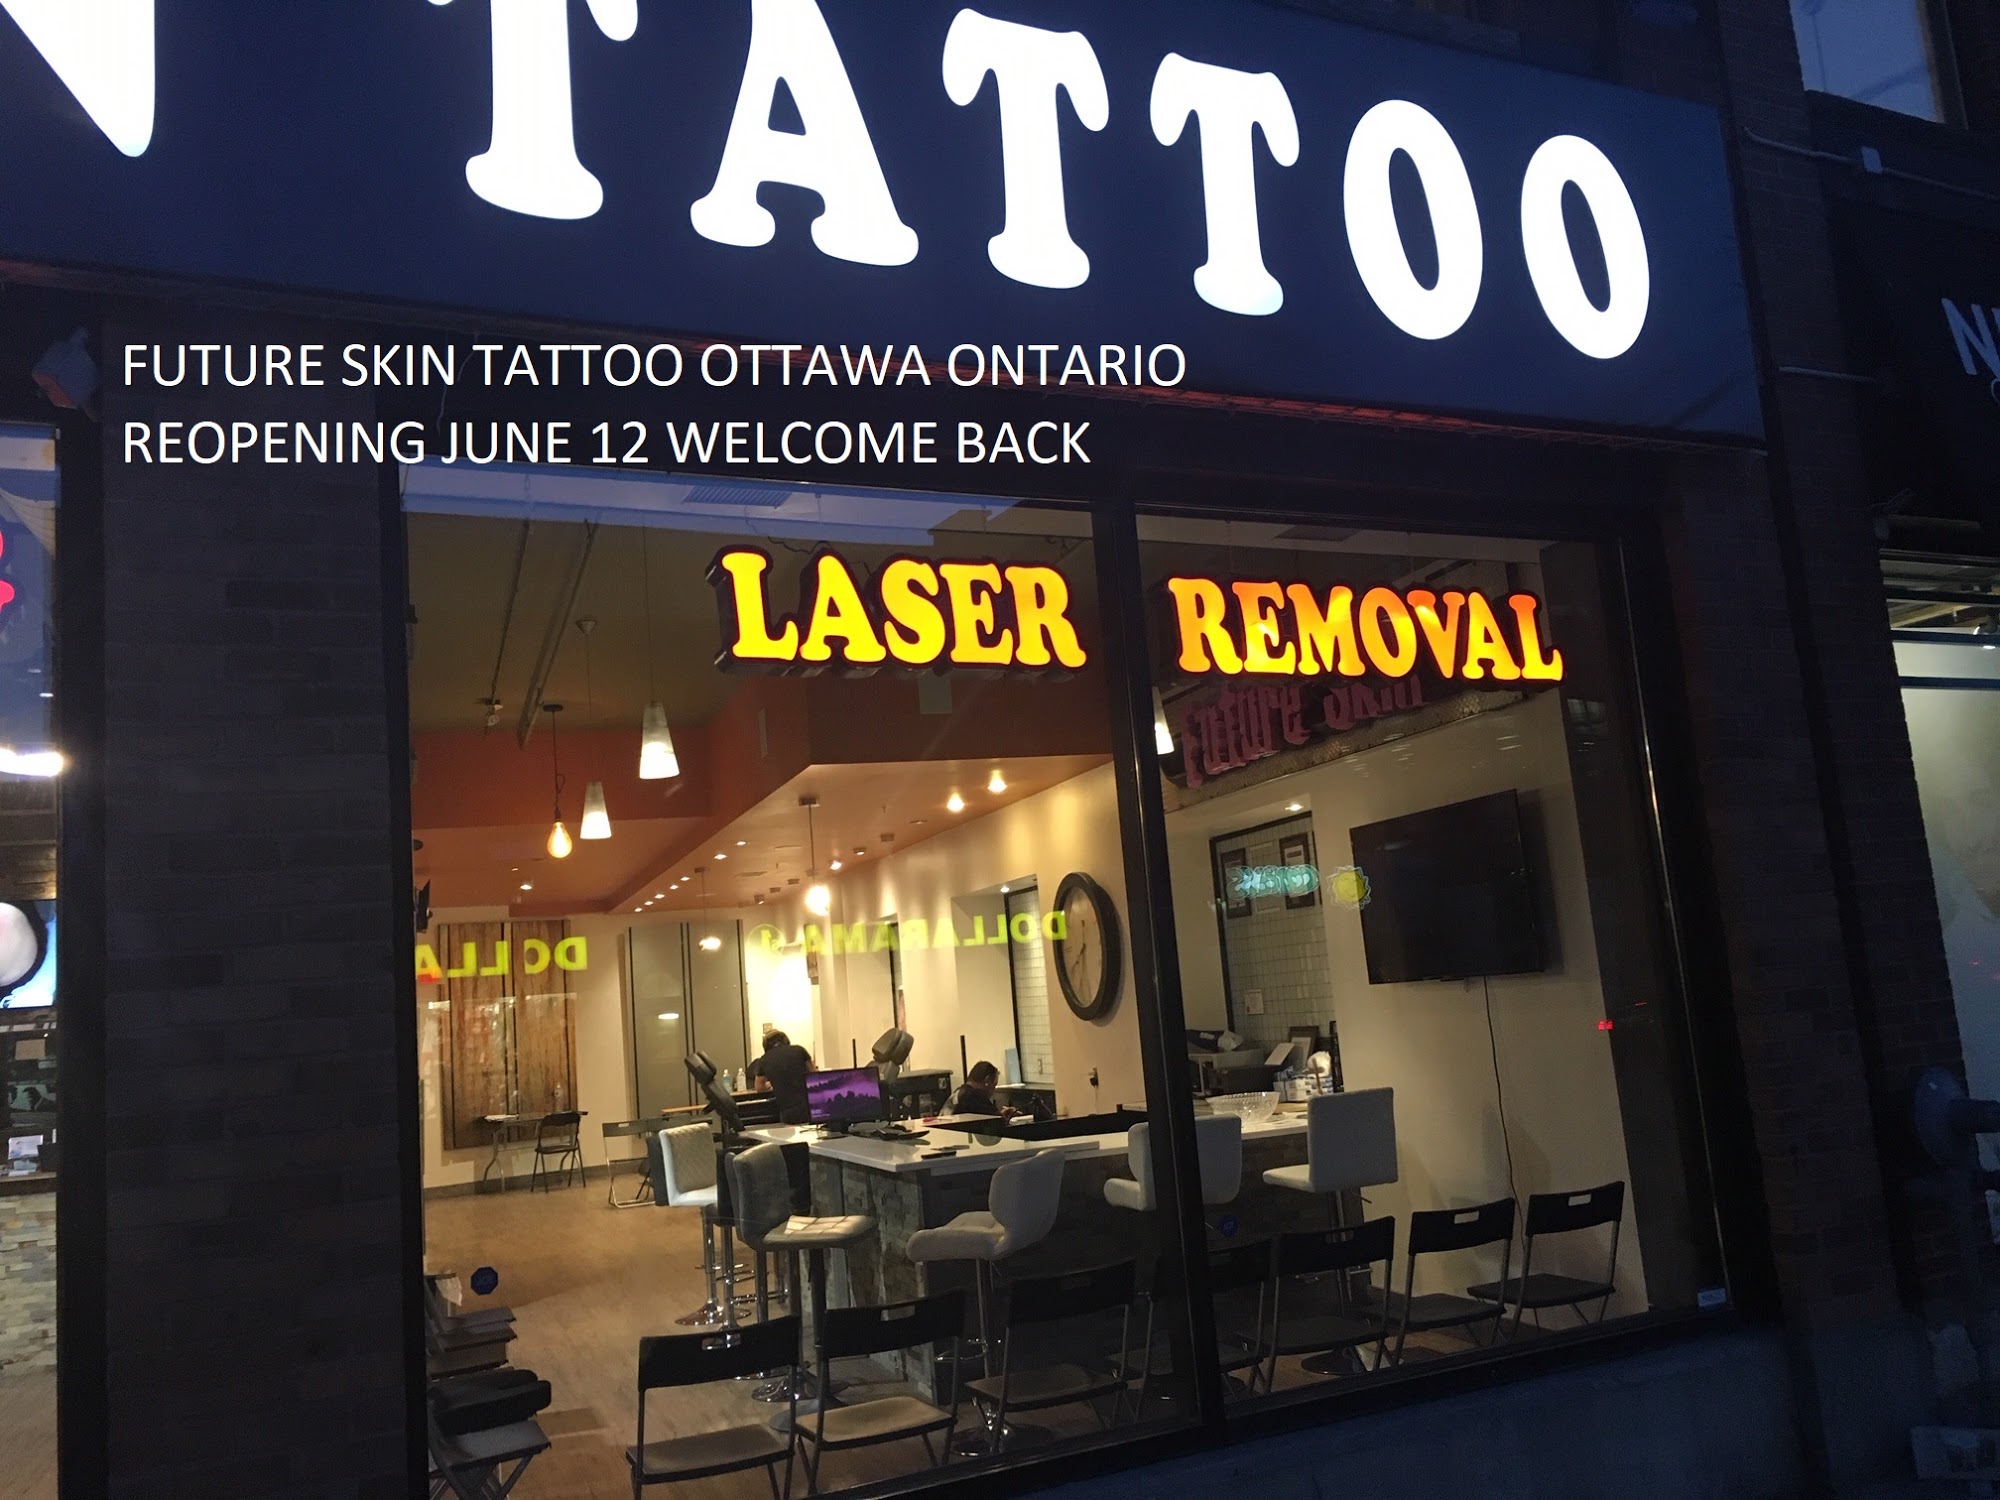 Future Skin Tattoo and Body Piercing Parlor